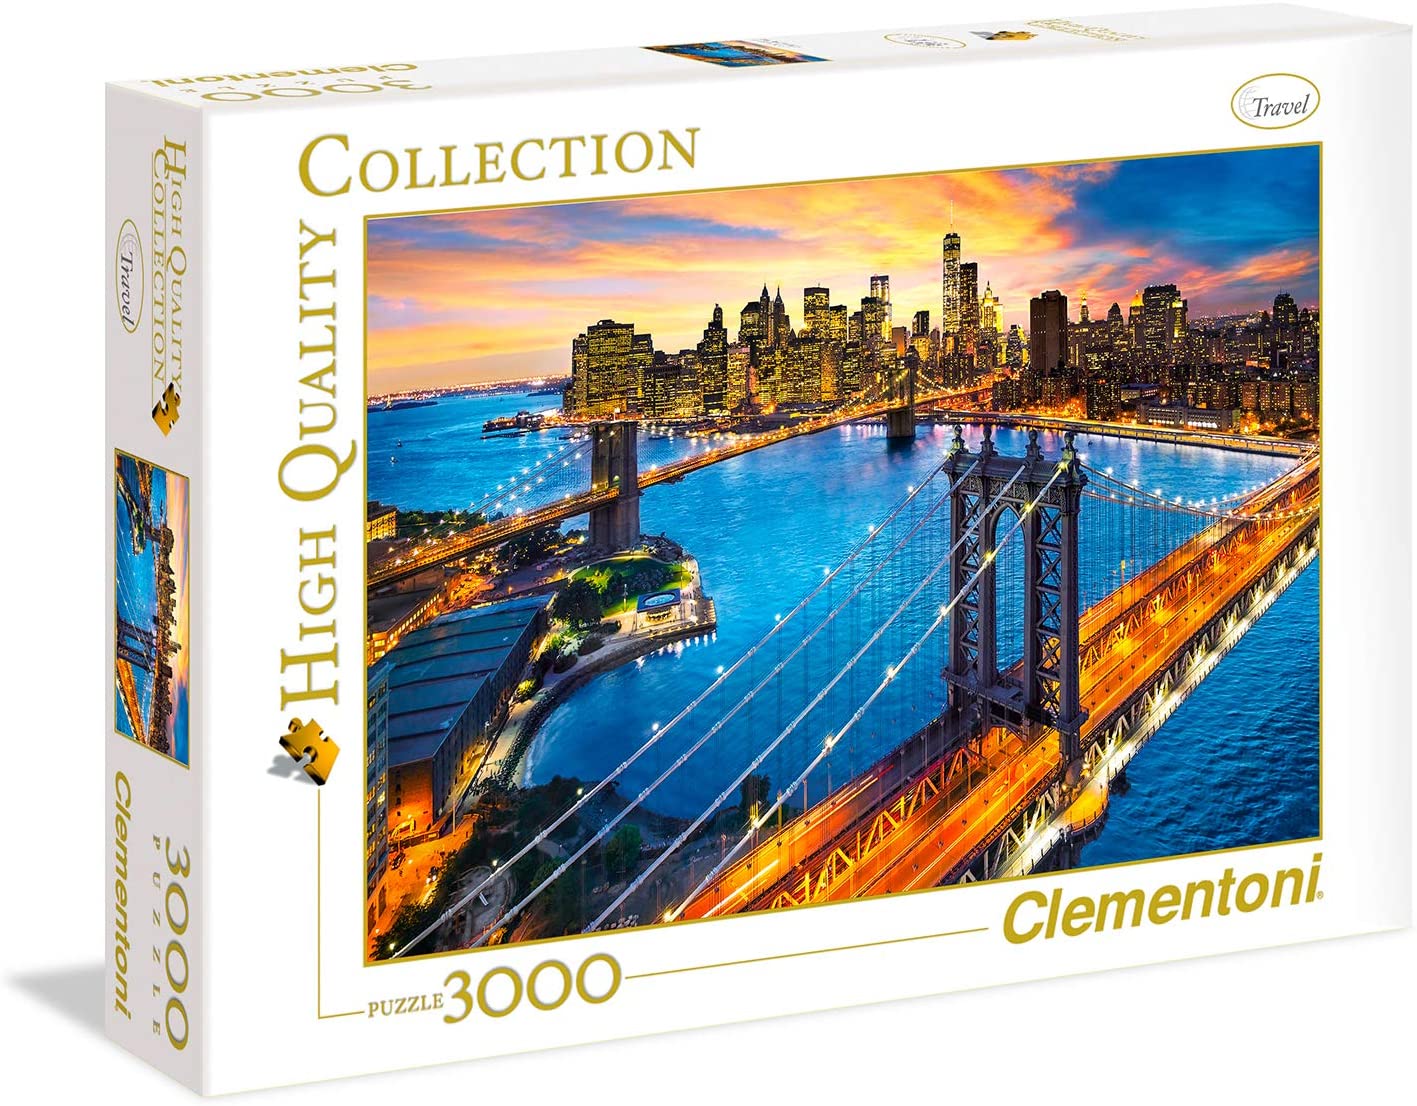 CLEMENTONI - BOARD GAME - 3000 PCS - HIGH QUALITY COLLECTION - PUZZLE - MOD: CLM33546